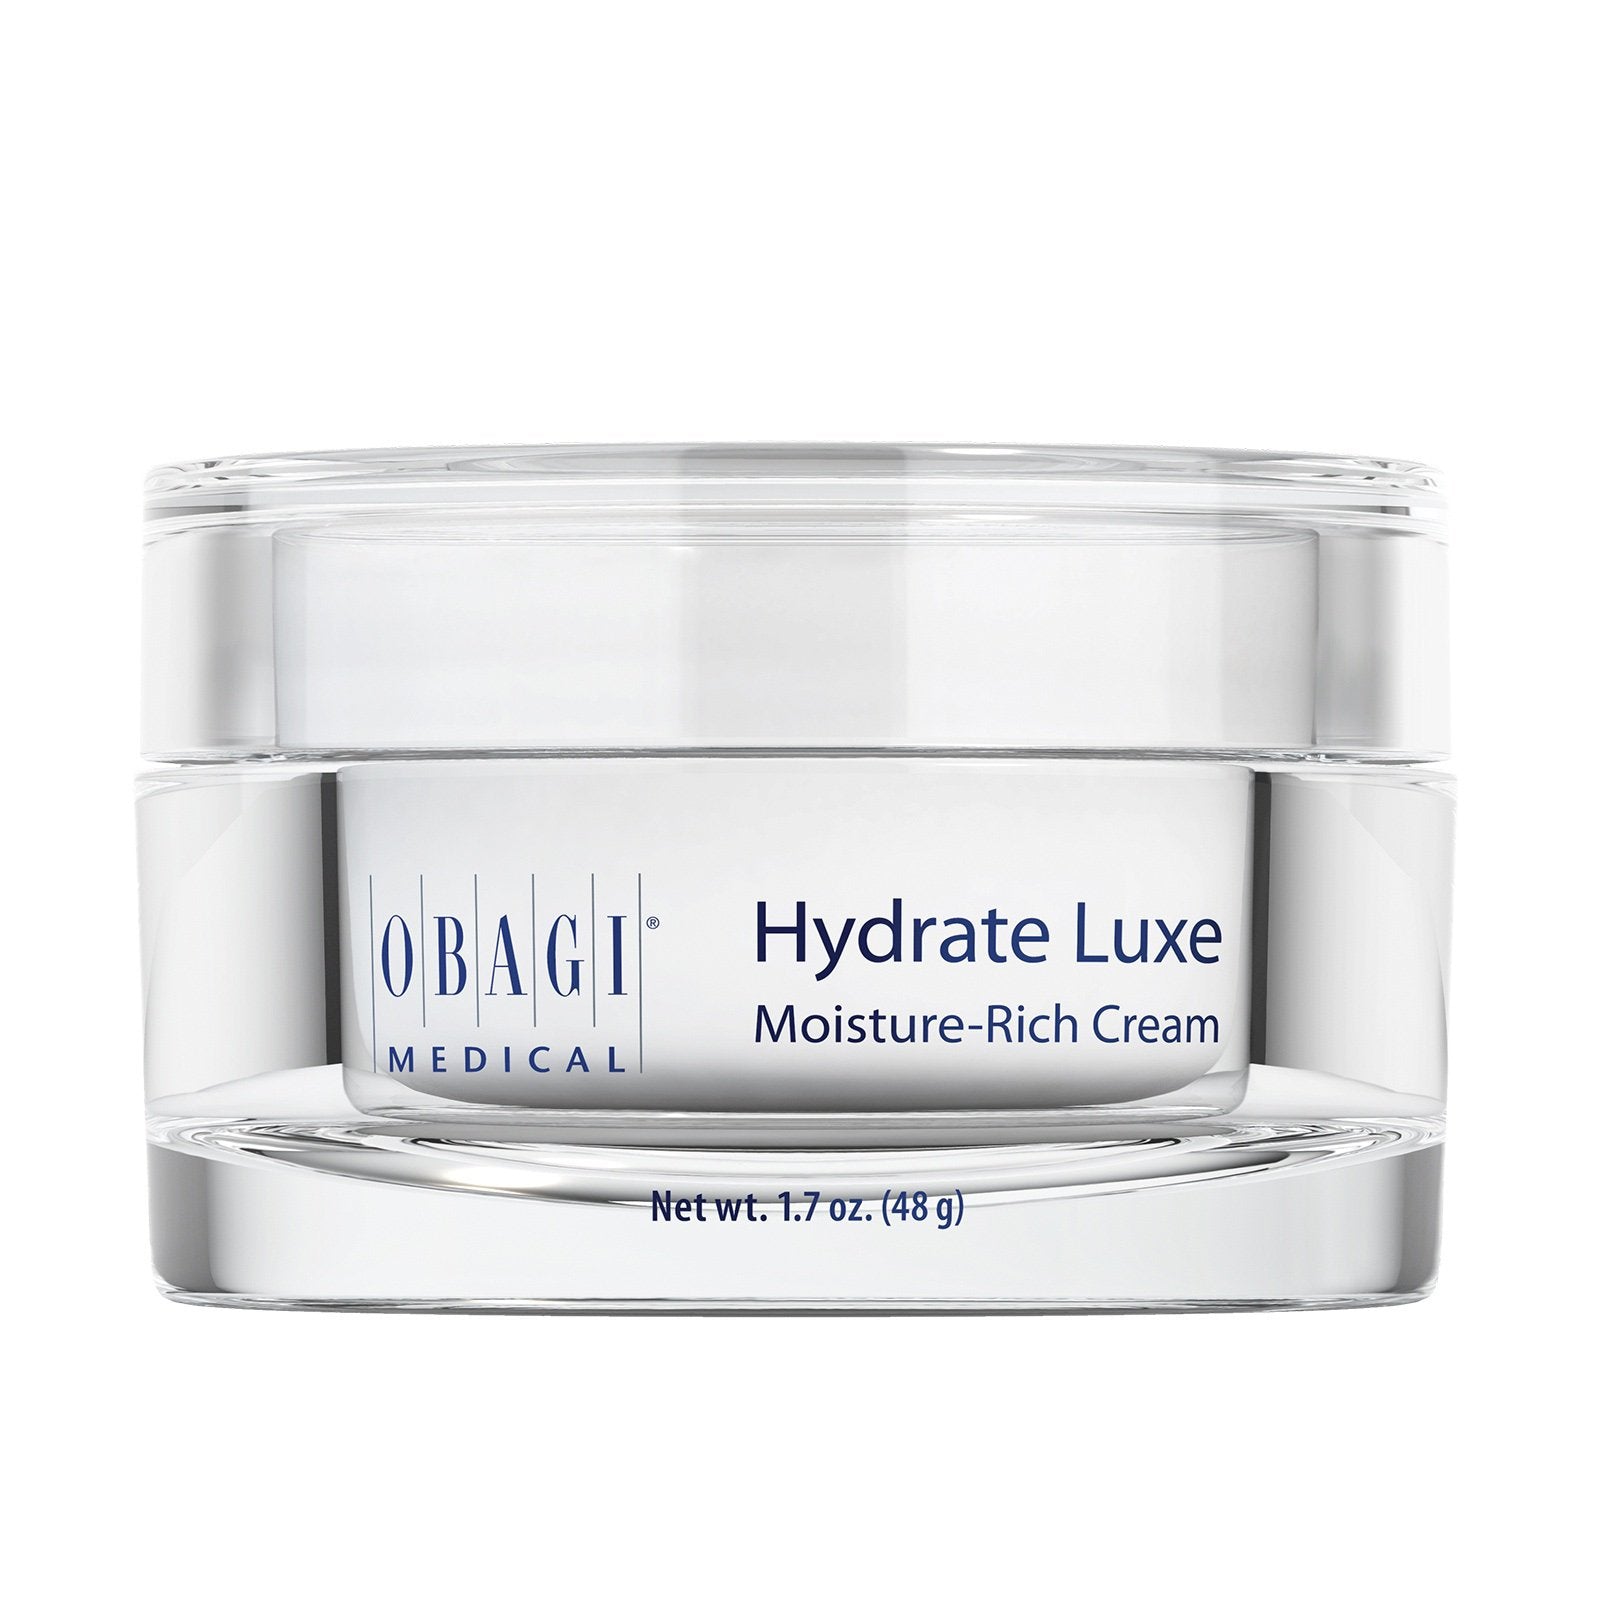 Obagi Hydrate Luxe (1.7 oz)